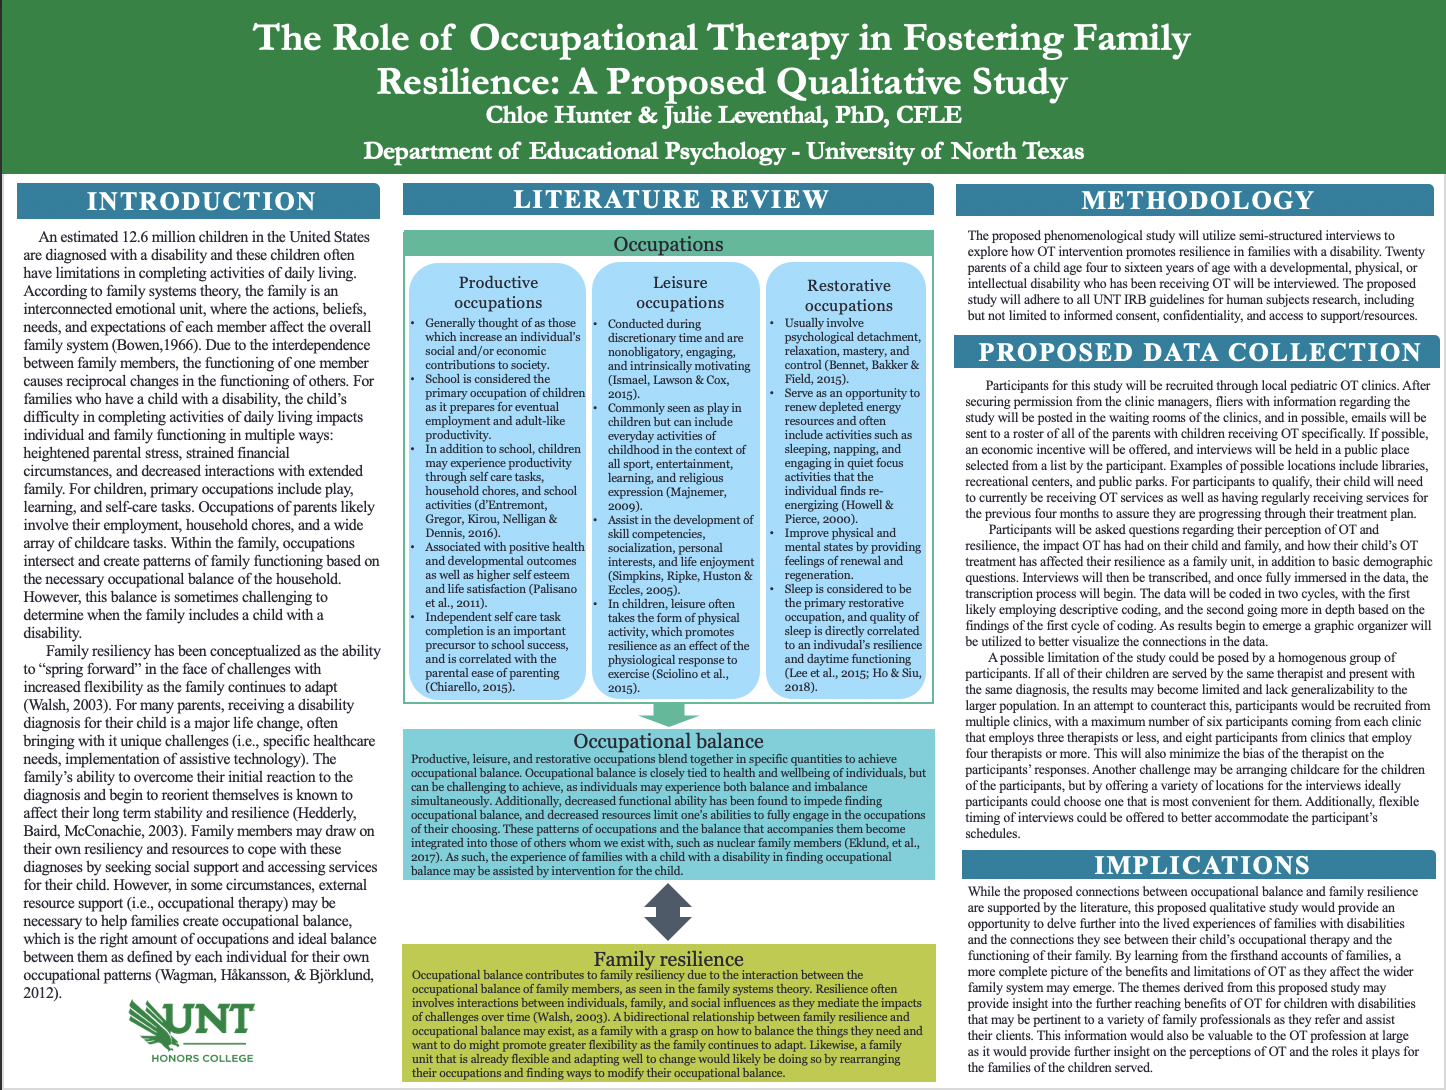 The Role of Occupational Therapy in Fostering Family Resilience: A Proposed Qualitative Study